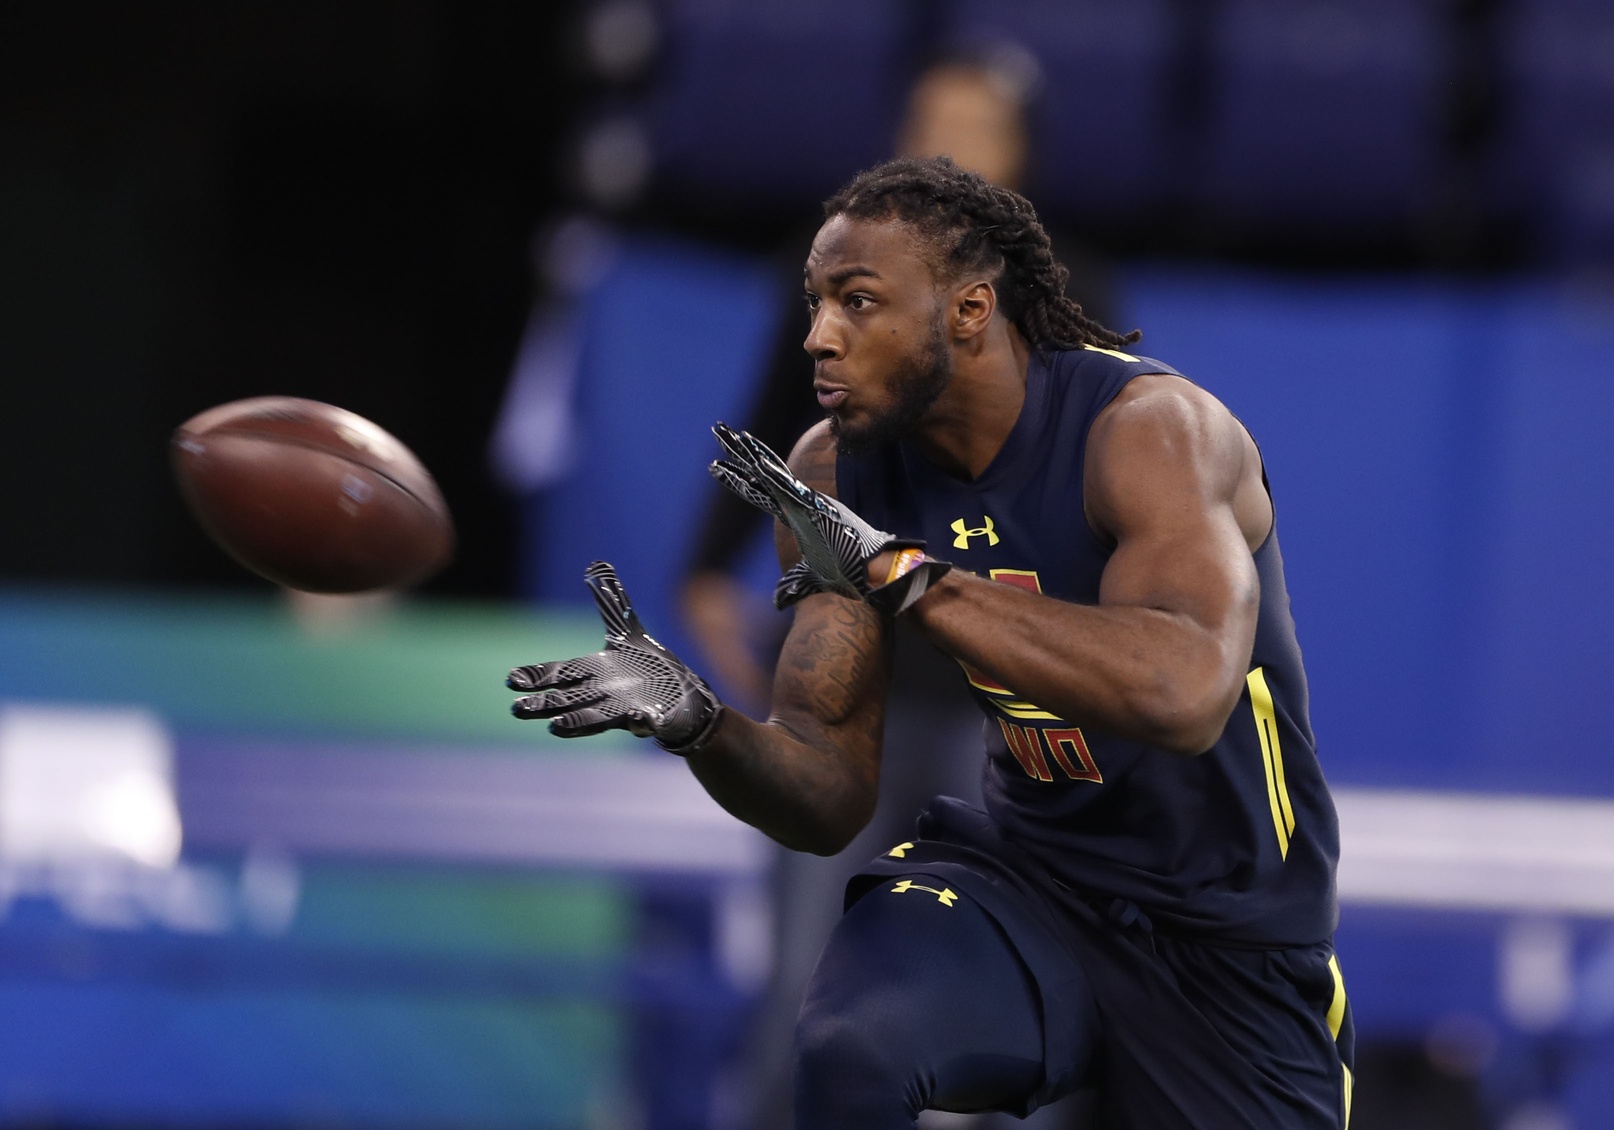 Mar 4, 2017; Indianapolis, IN, USA; Clemson Tigers wide receiver Mike Williams goes through pass catching workout drills during the 2017 NFL Combine at Lucas Oil Stadium. Mandatory Credit: Brian Spurlock-USA TODAY Sports